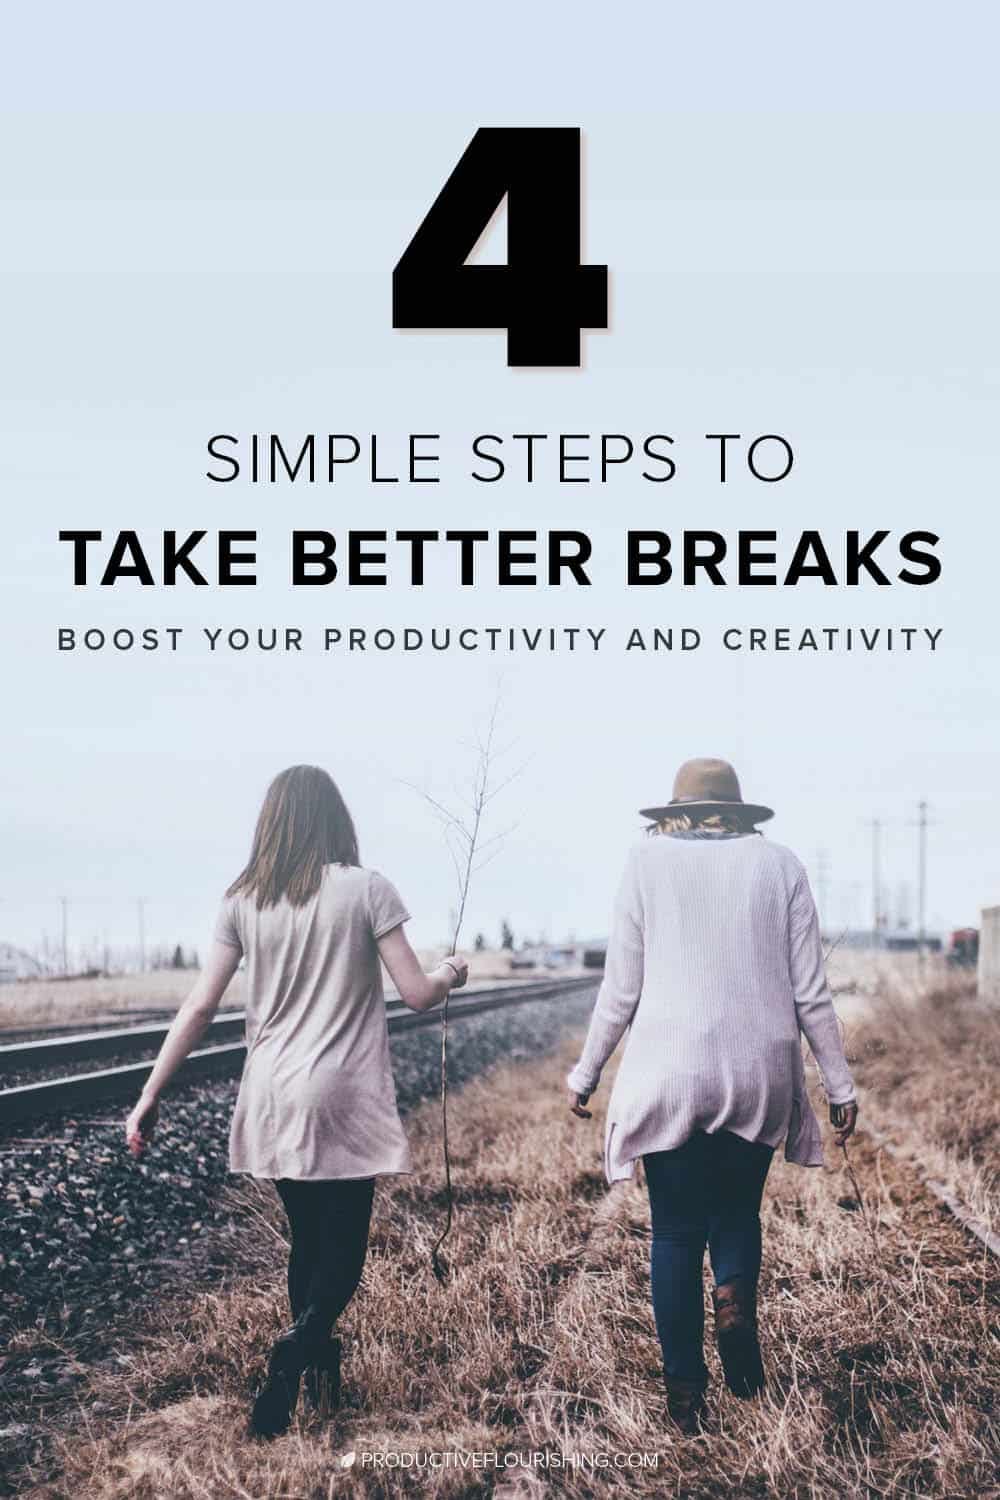 Read about 4 simple ways to take better breaks that will boost your productivity and creativity. Make space in your small business day for delight and appreciation (those things that give life and work meaning). #entrepreneur #smallbusinessowner #productiveflourishing